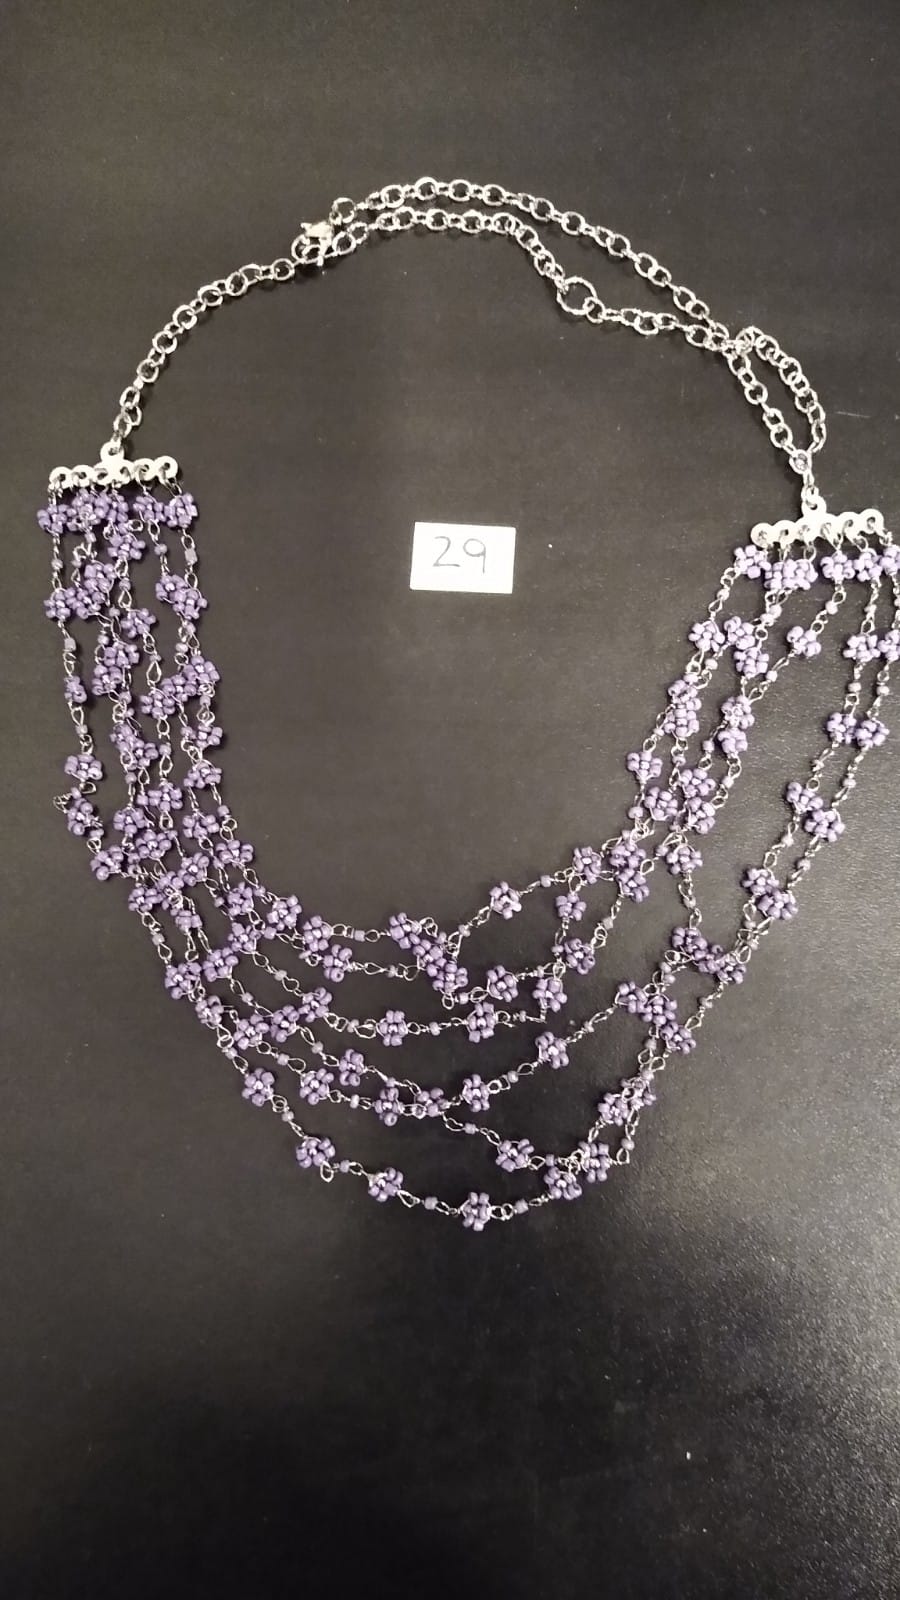 Necklace - Lilac Delicate Clusters in Multi strands